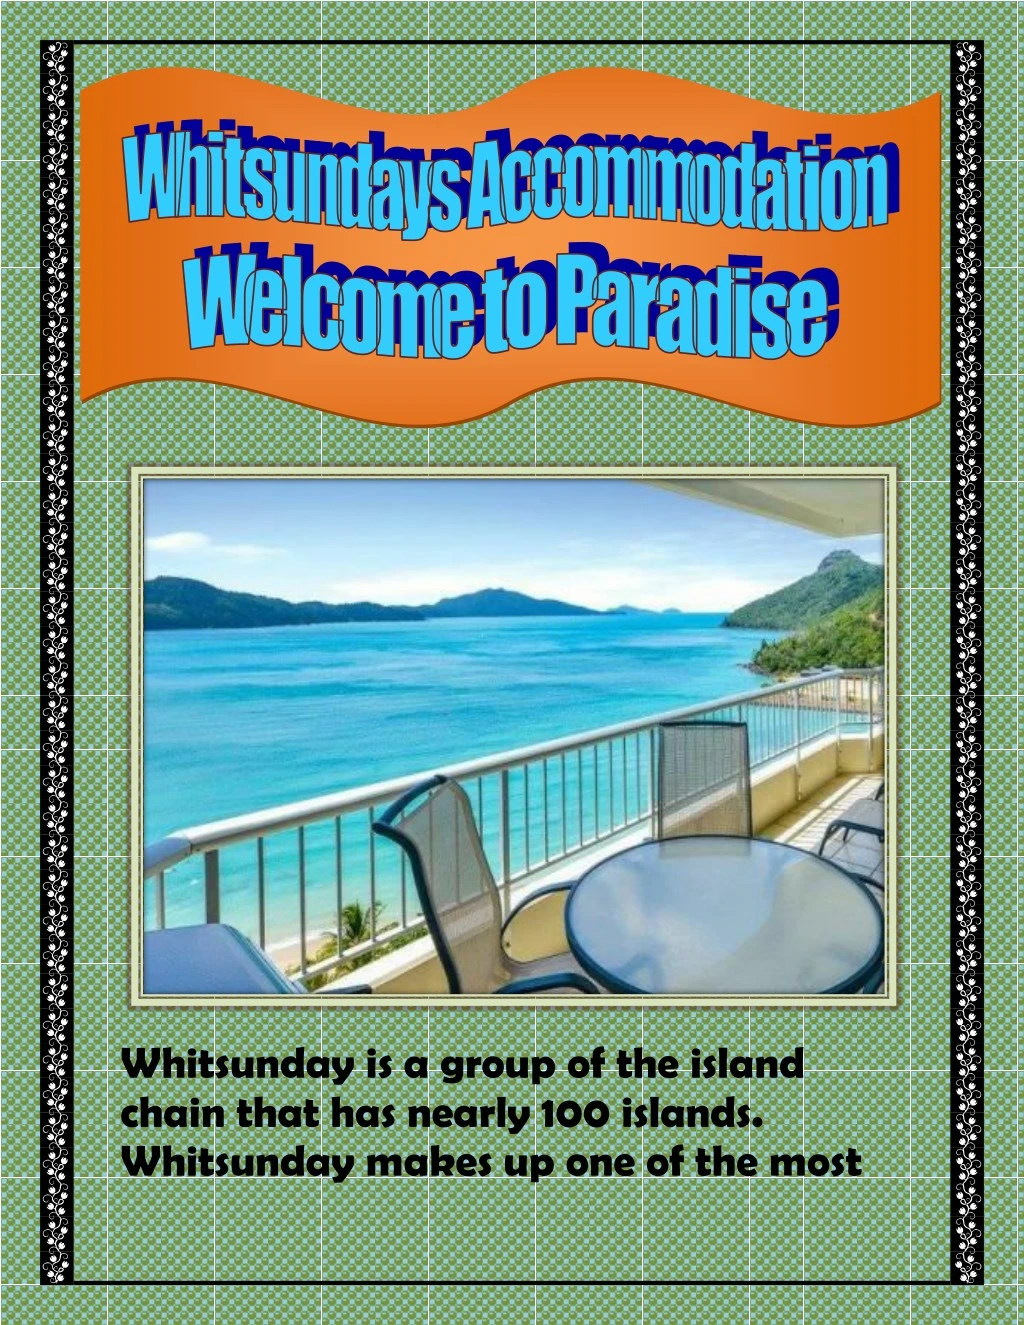 whitsunday is a group of the island chain that